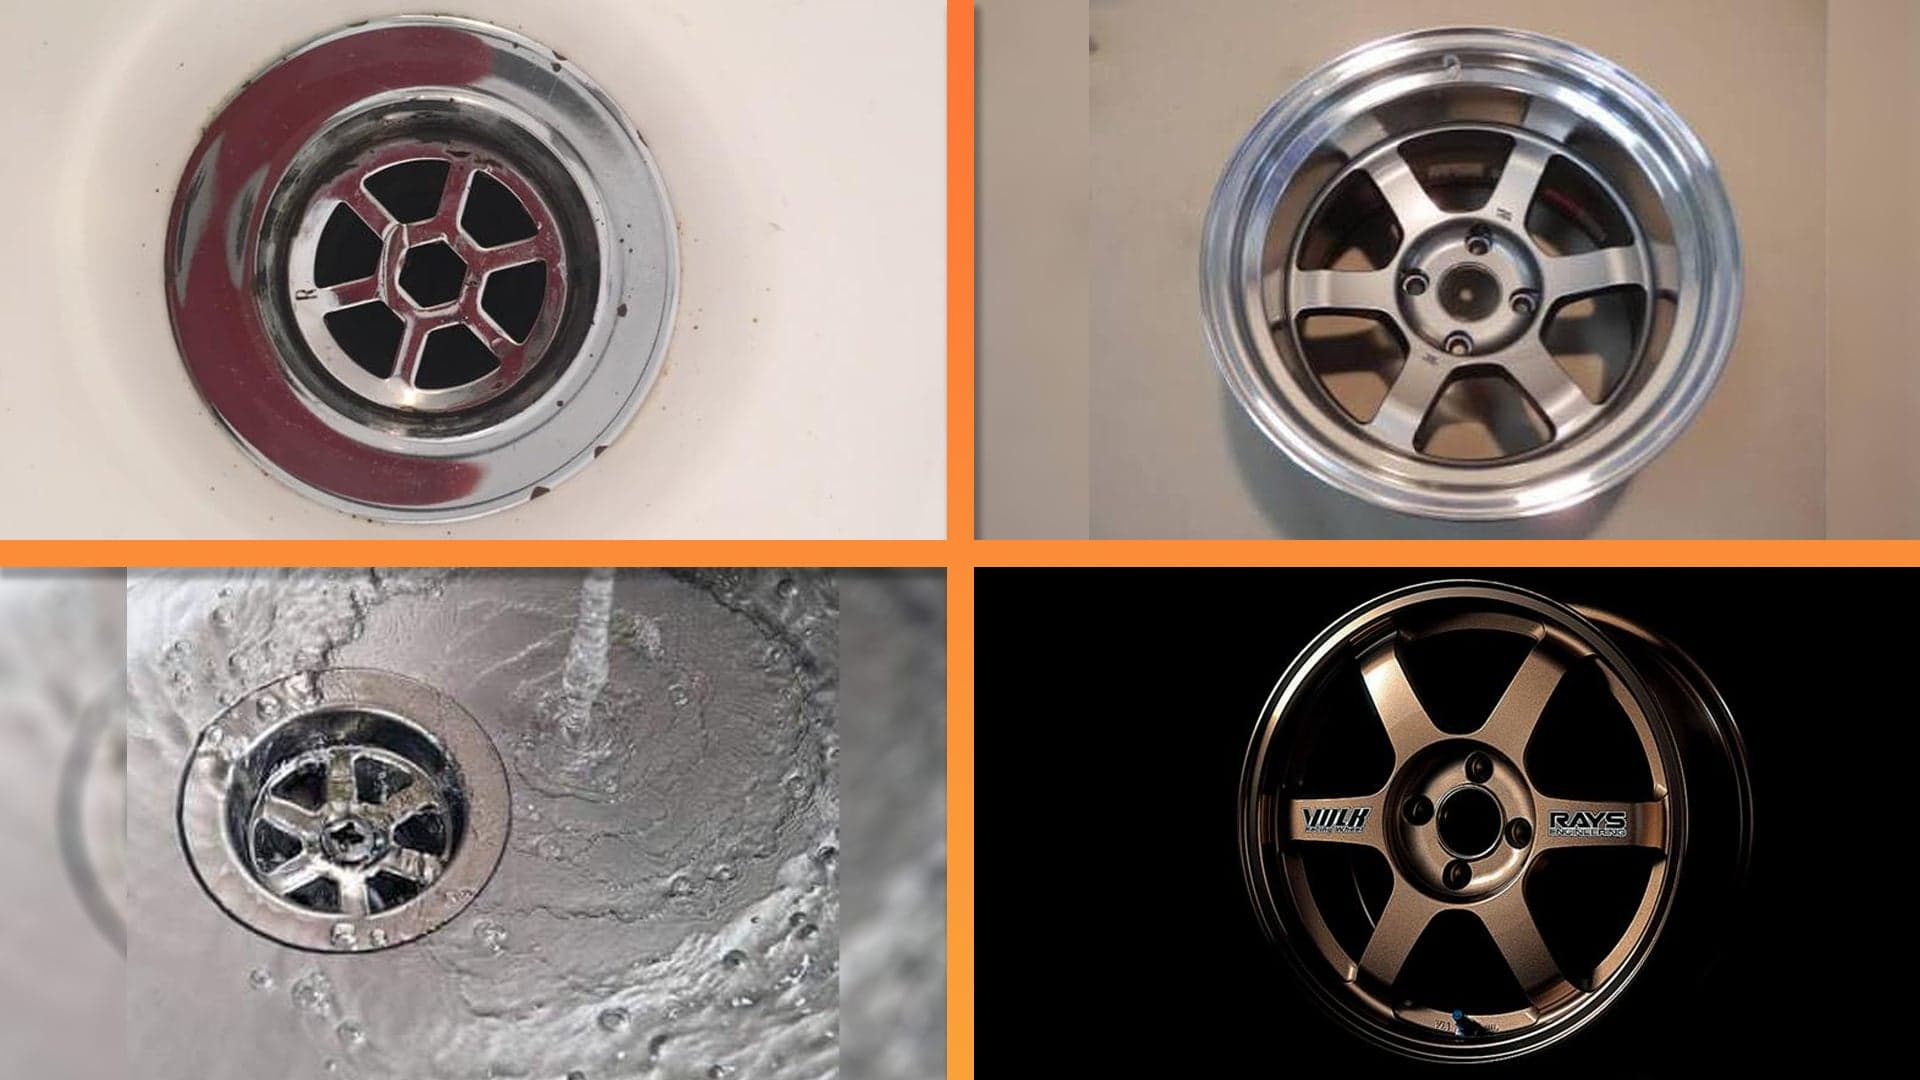 Have You Noticed That Classic Japanese Car Wheels Look Like Sink Drains?